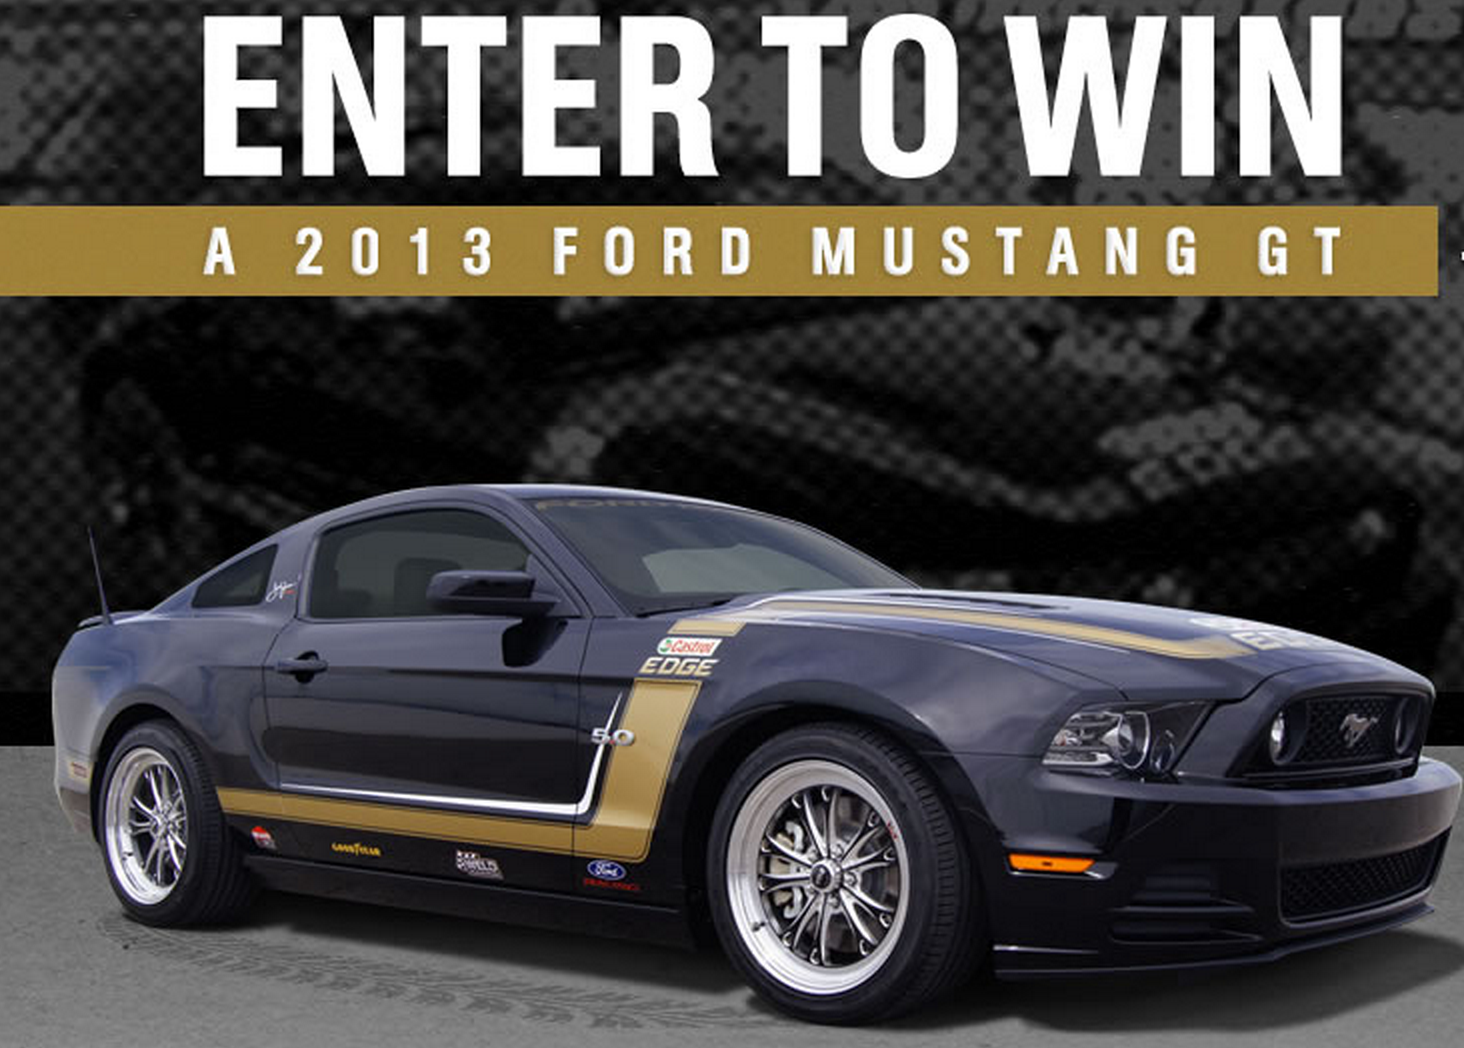 Ford mustang sweepstakes 2013 #2